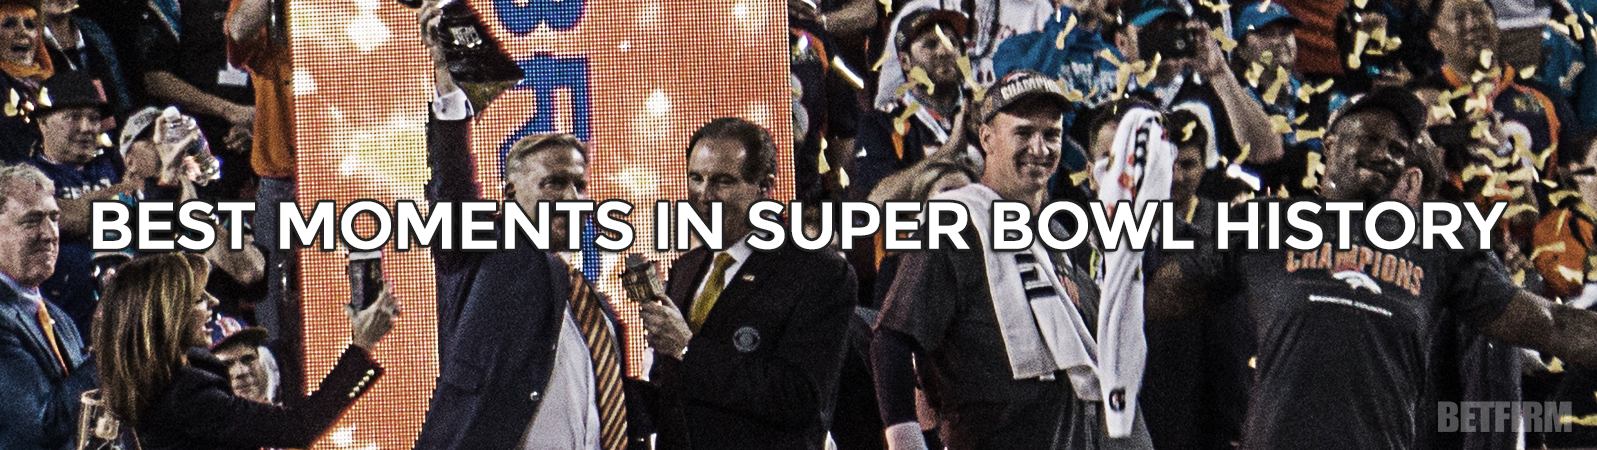 Best Moments in Super Bowl History